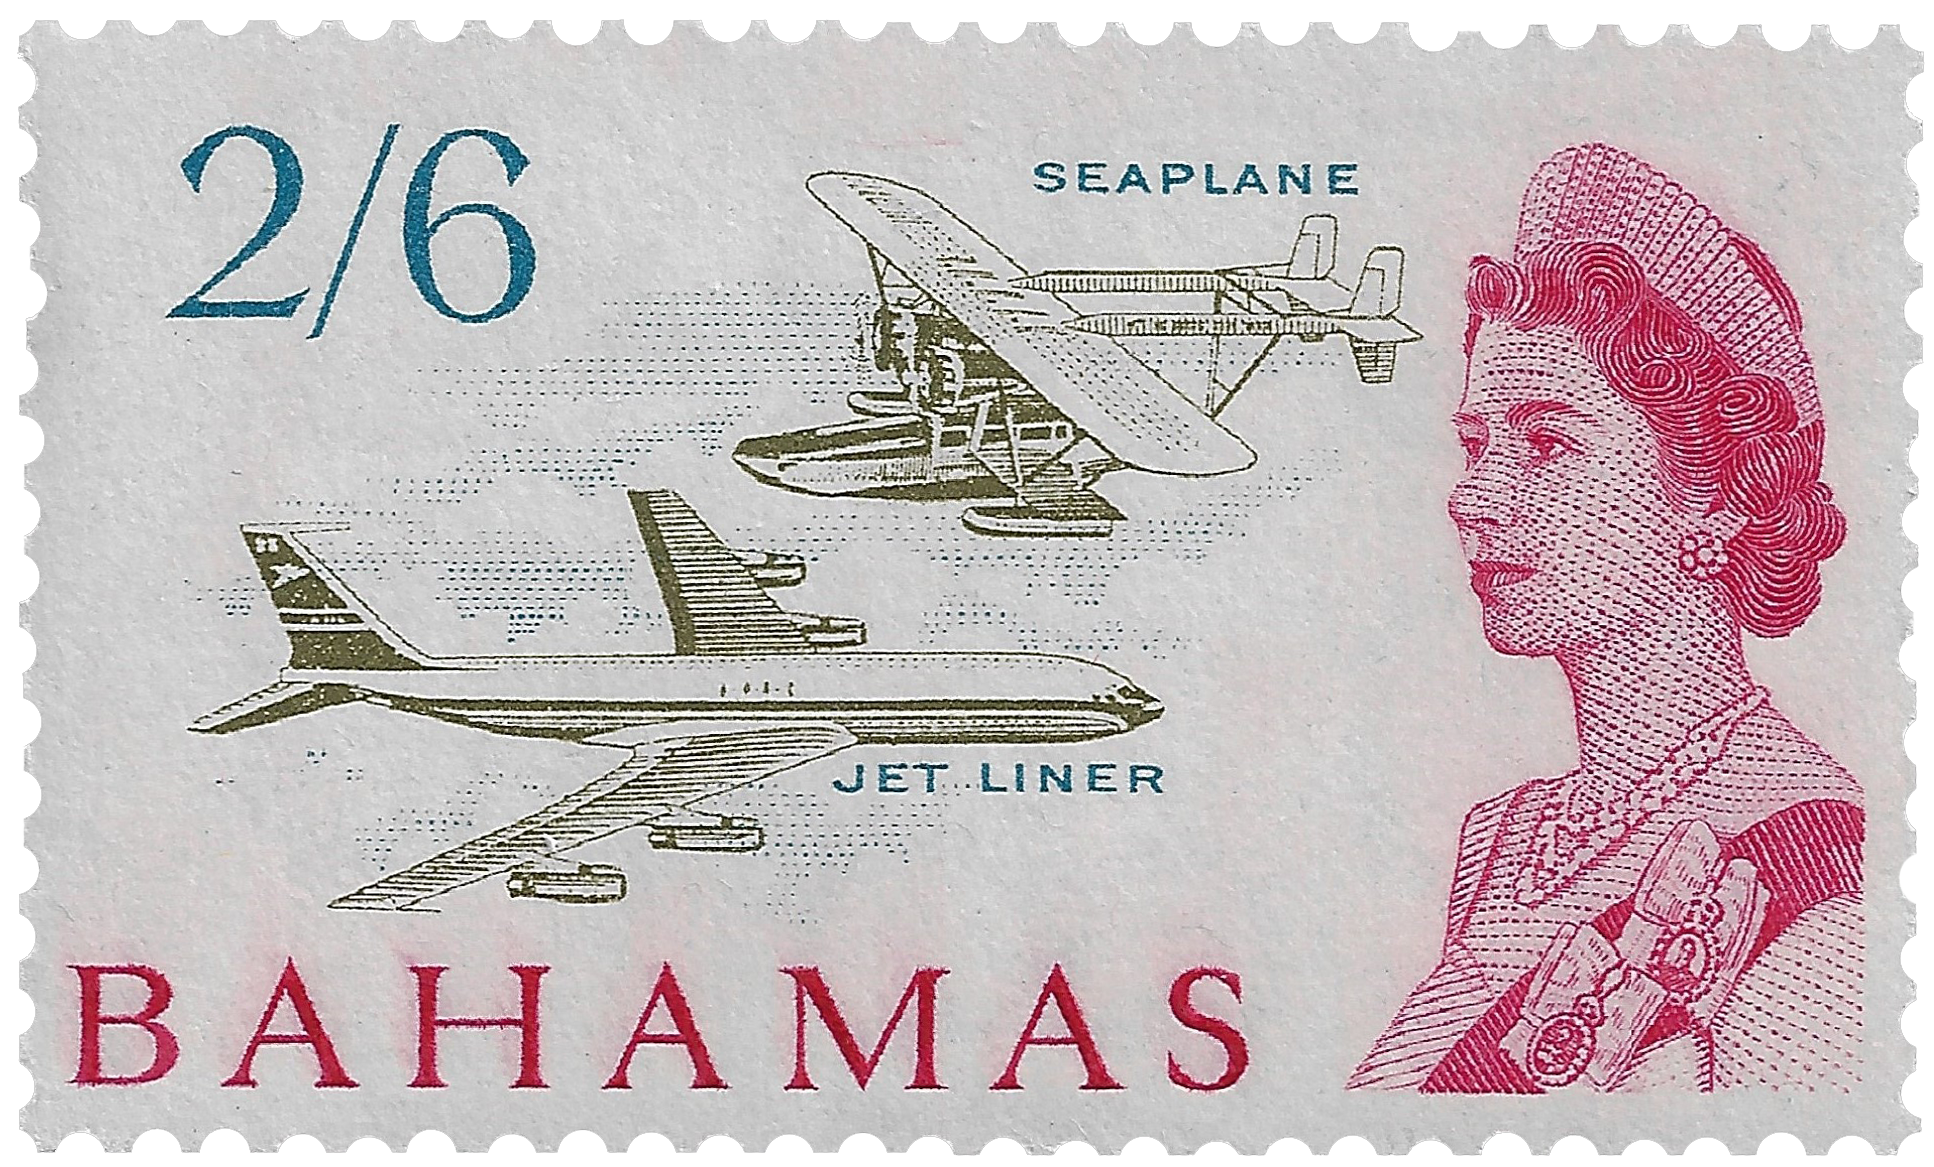 2.6s 1965, Seaplane and Jet Liner